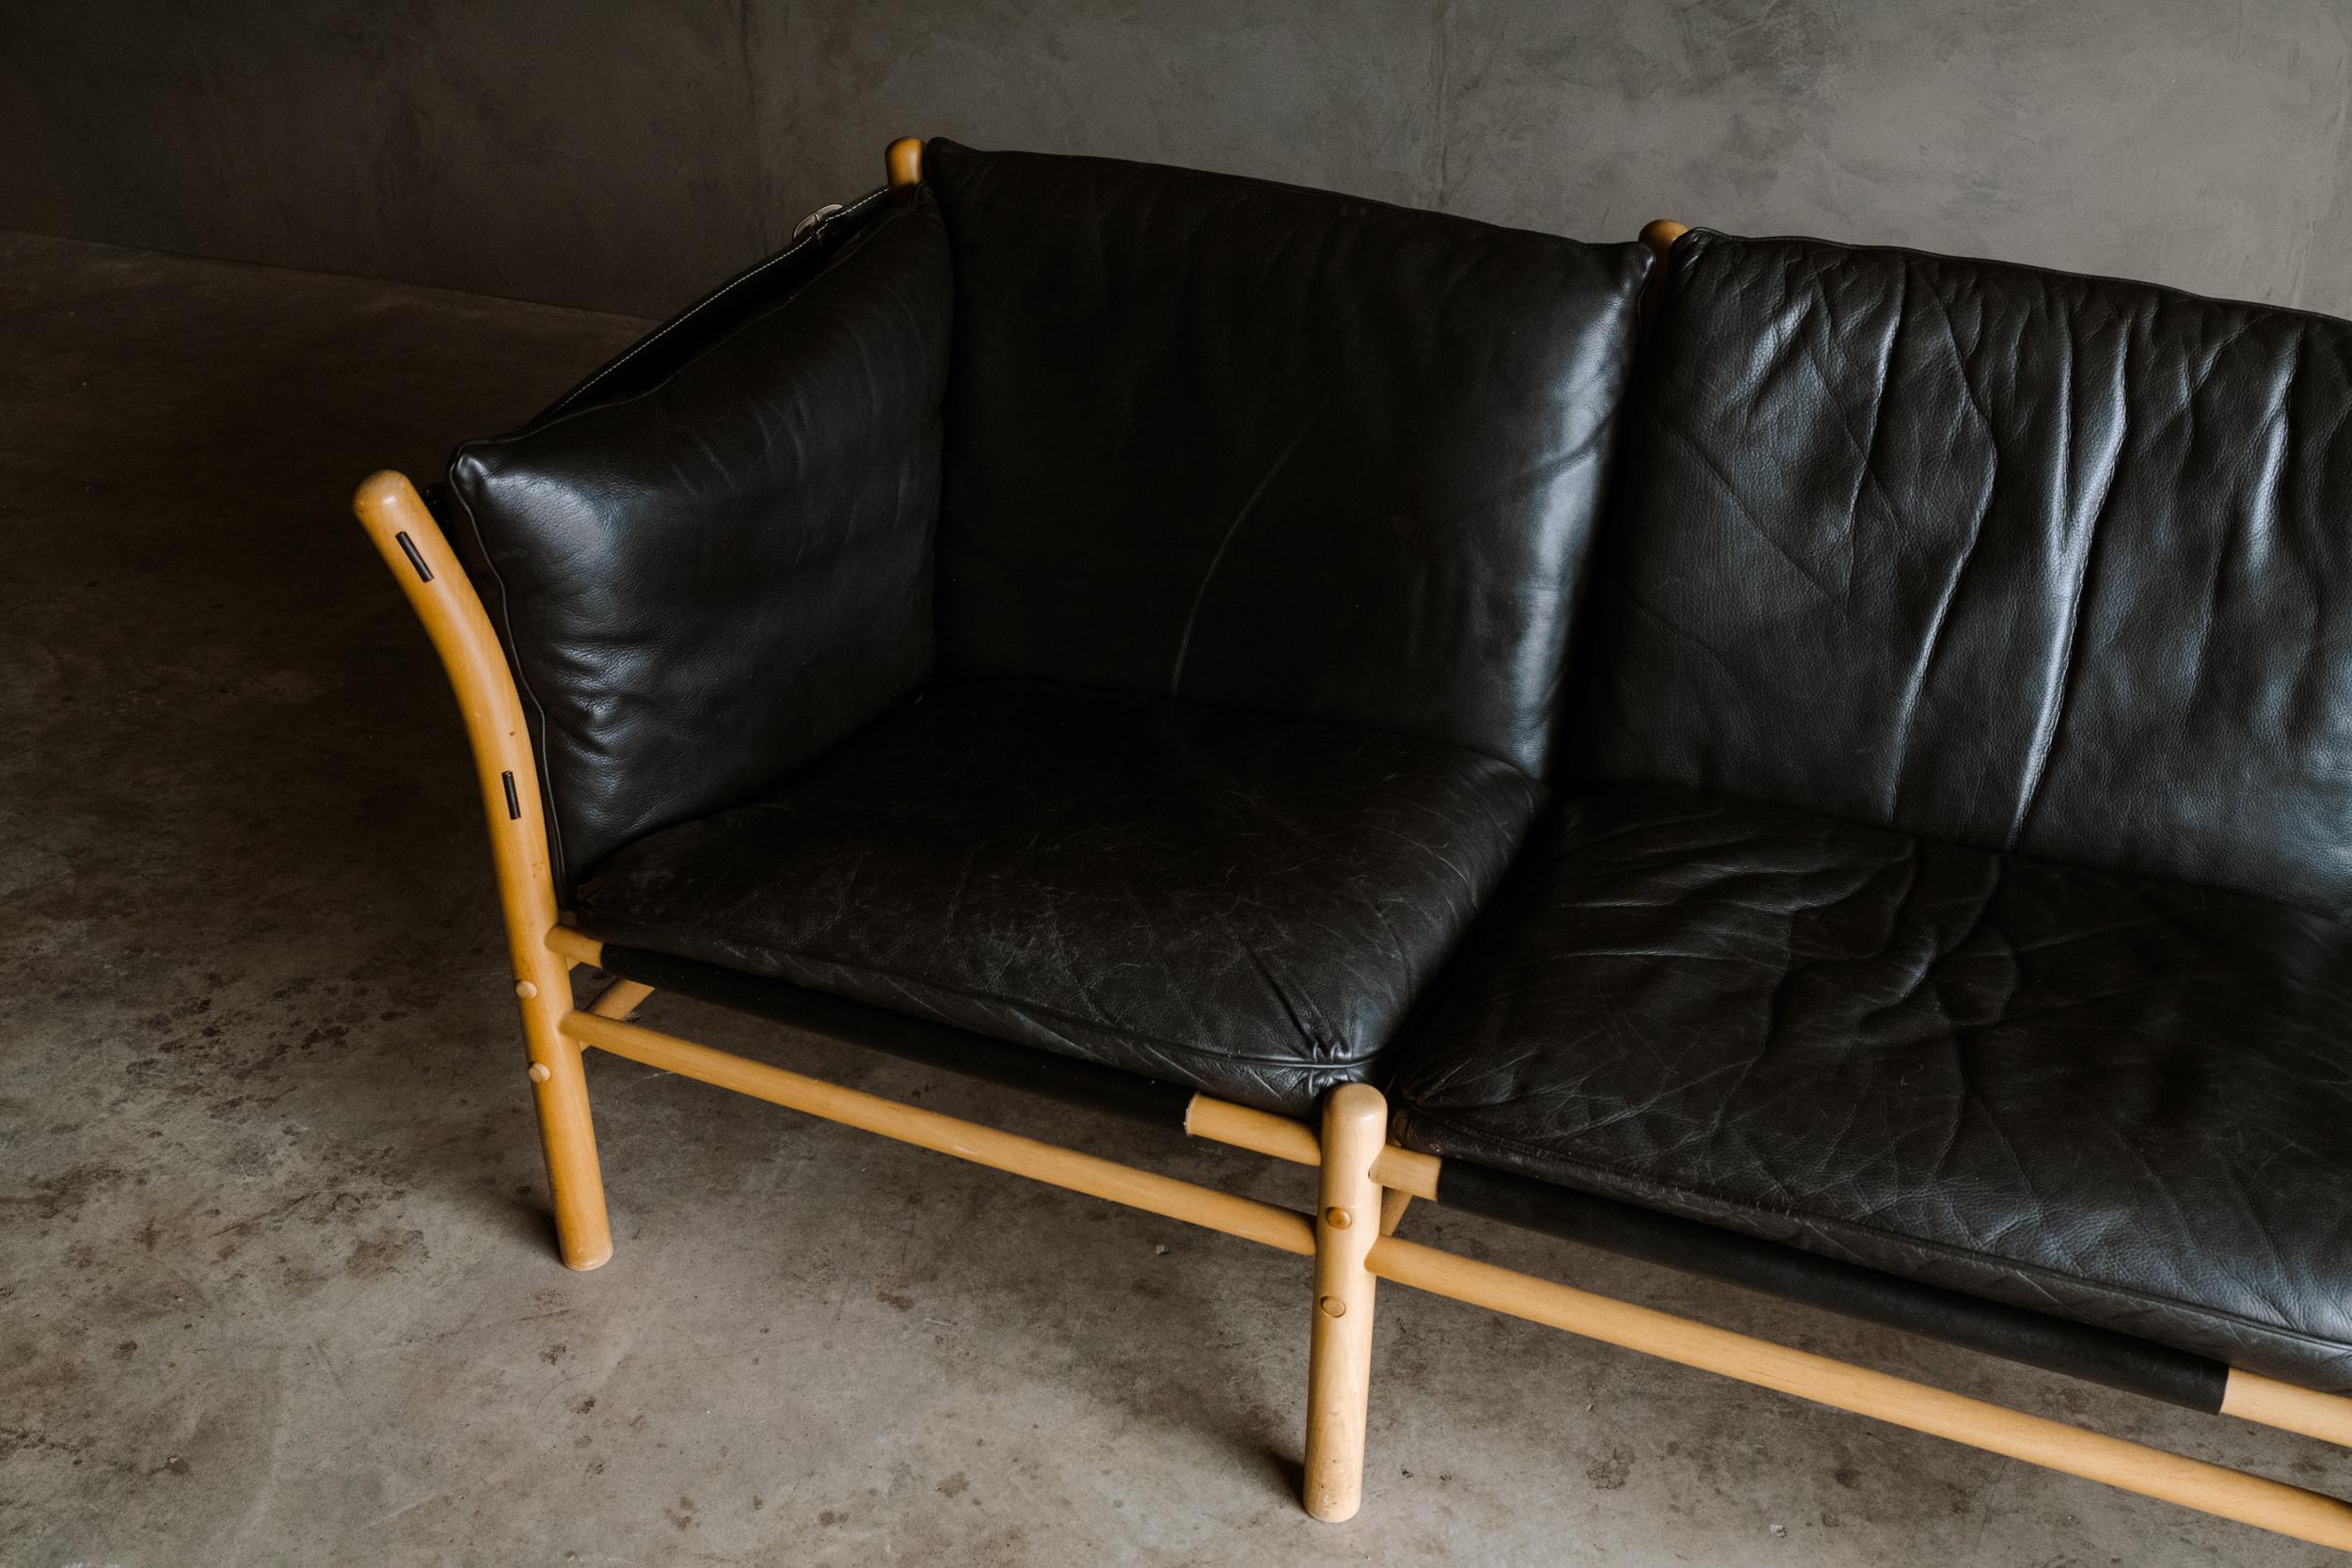 Vintage Arne Norell sofa model Ilona by Arne Norell AB in Sweden. Three-seat sofa with black leather cushions and a sold birch frame. Light wear and use.